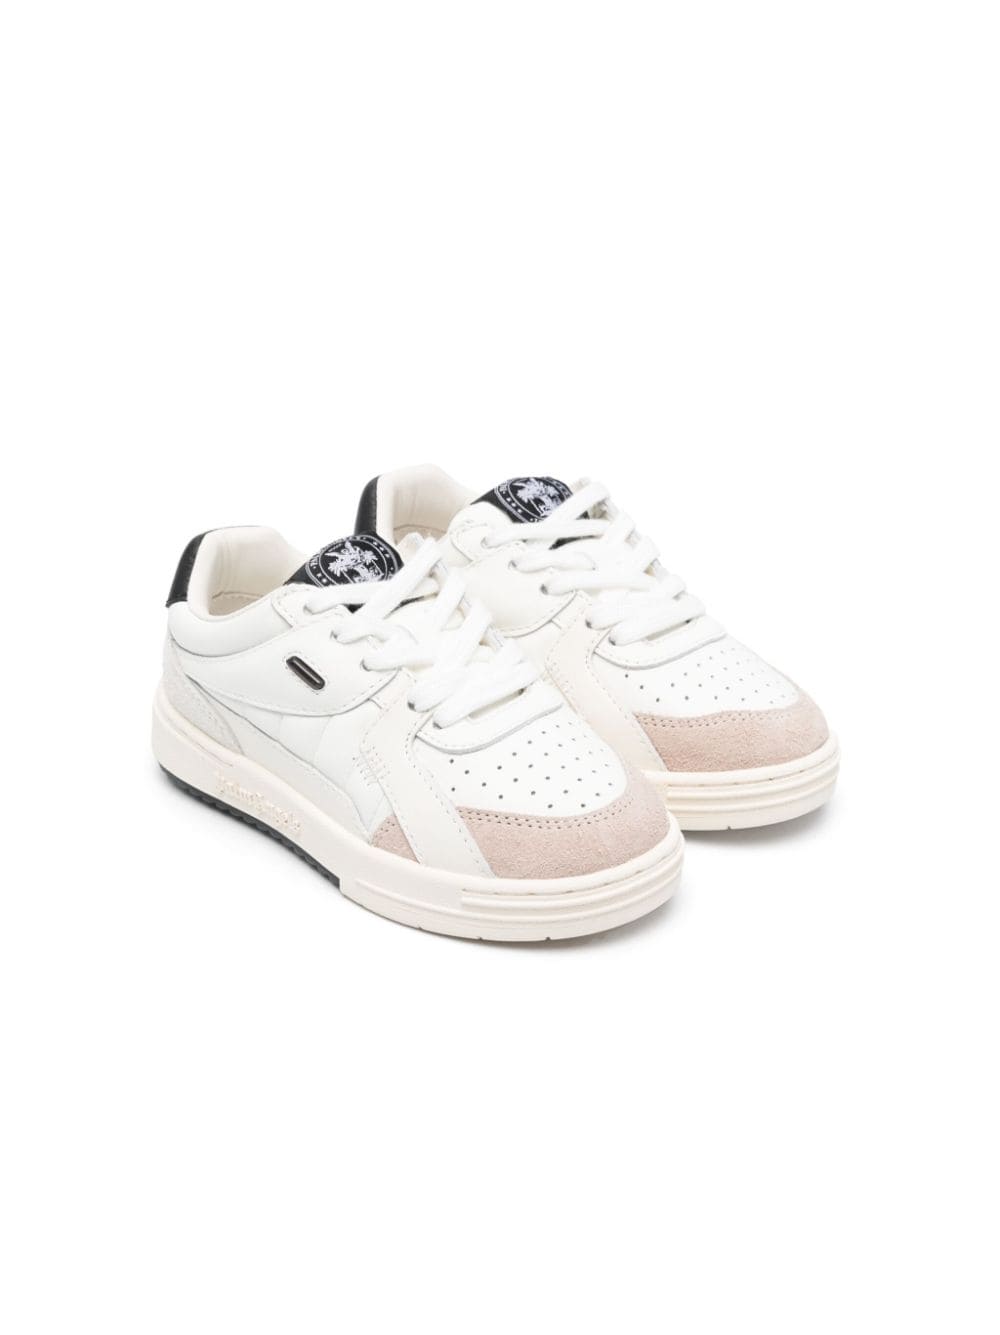 Palm Angels Kids perforated leather sneakers - White von Palm Angels Kids